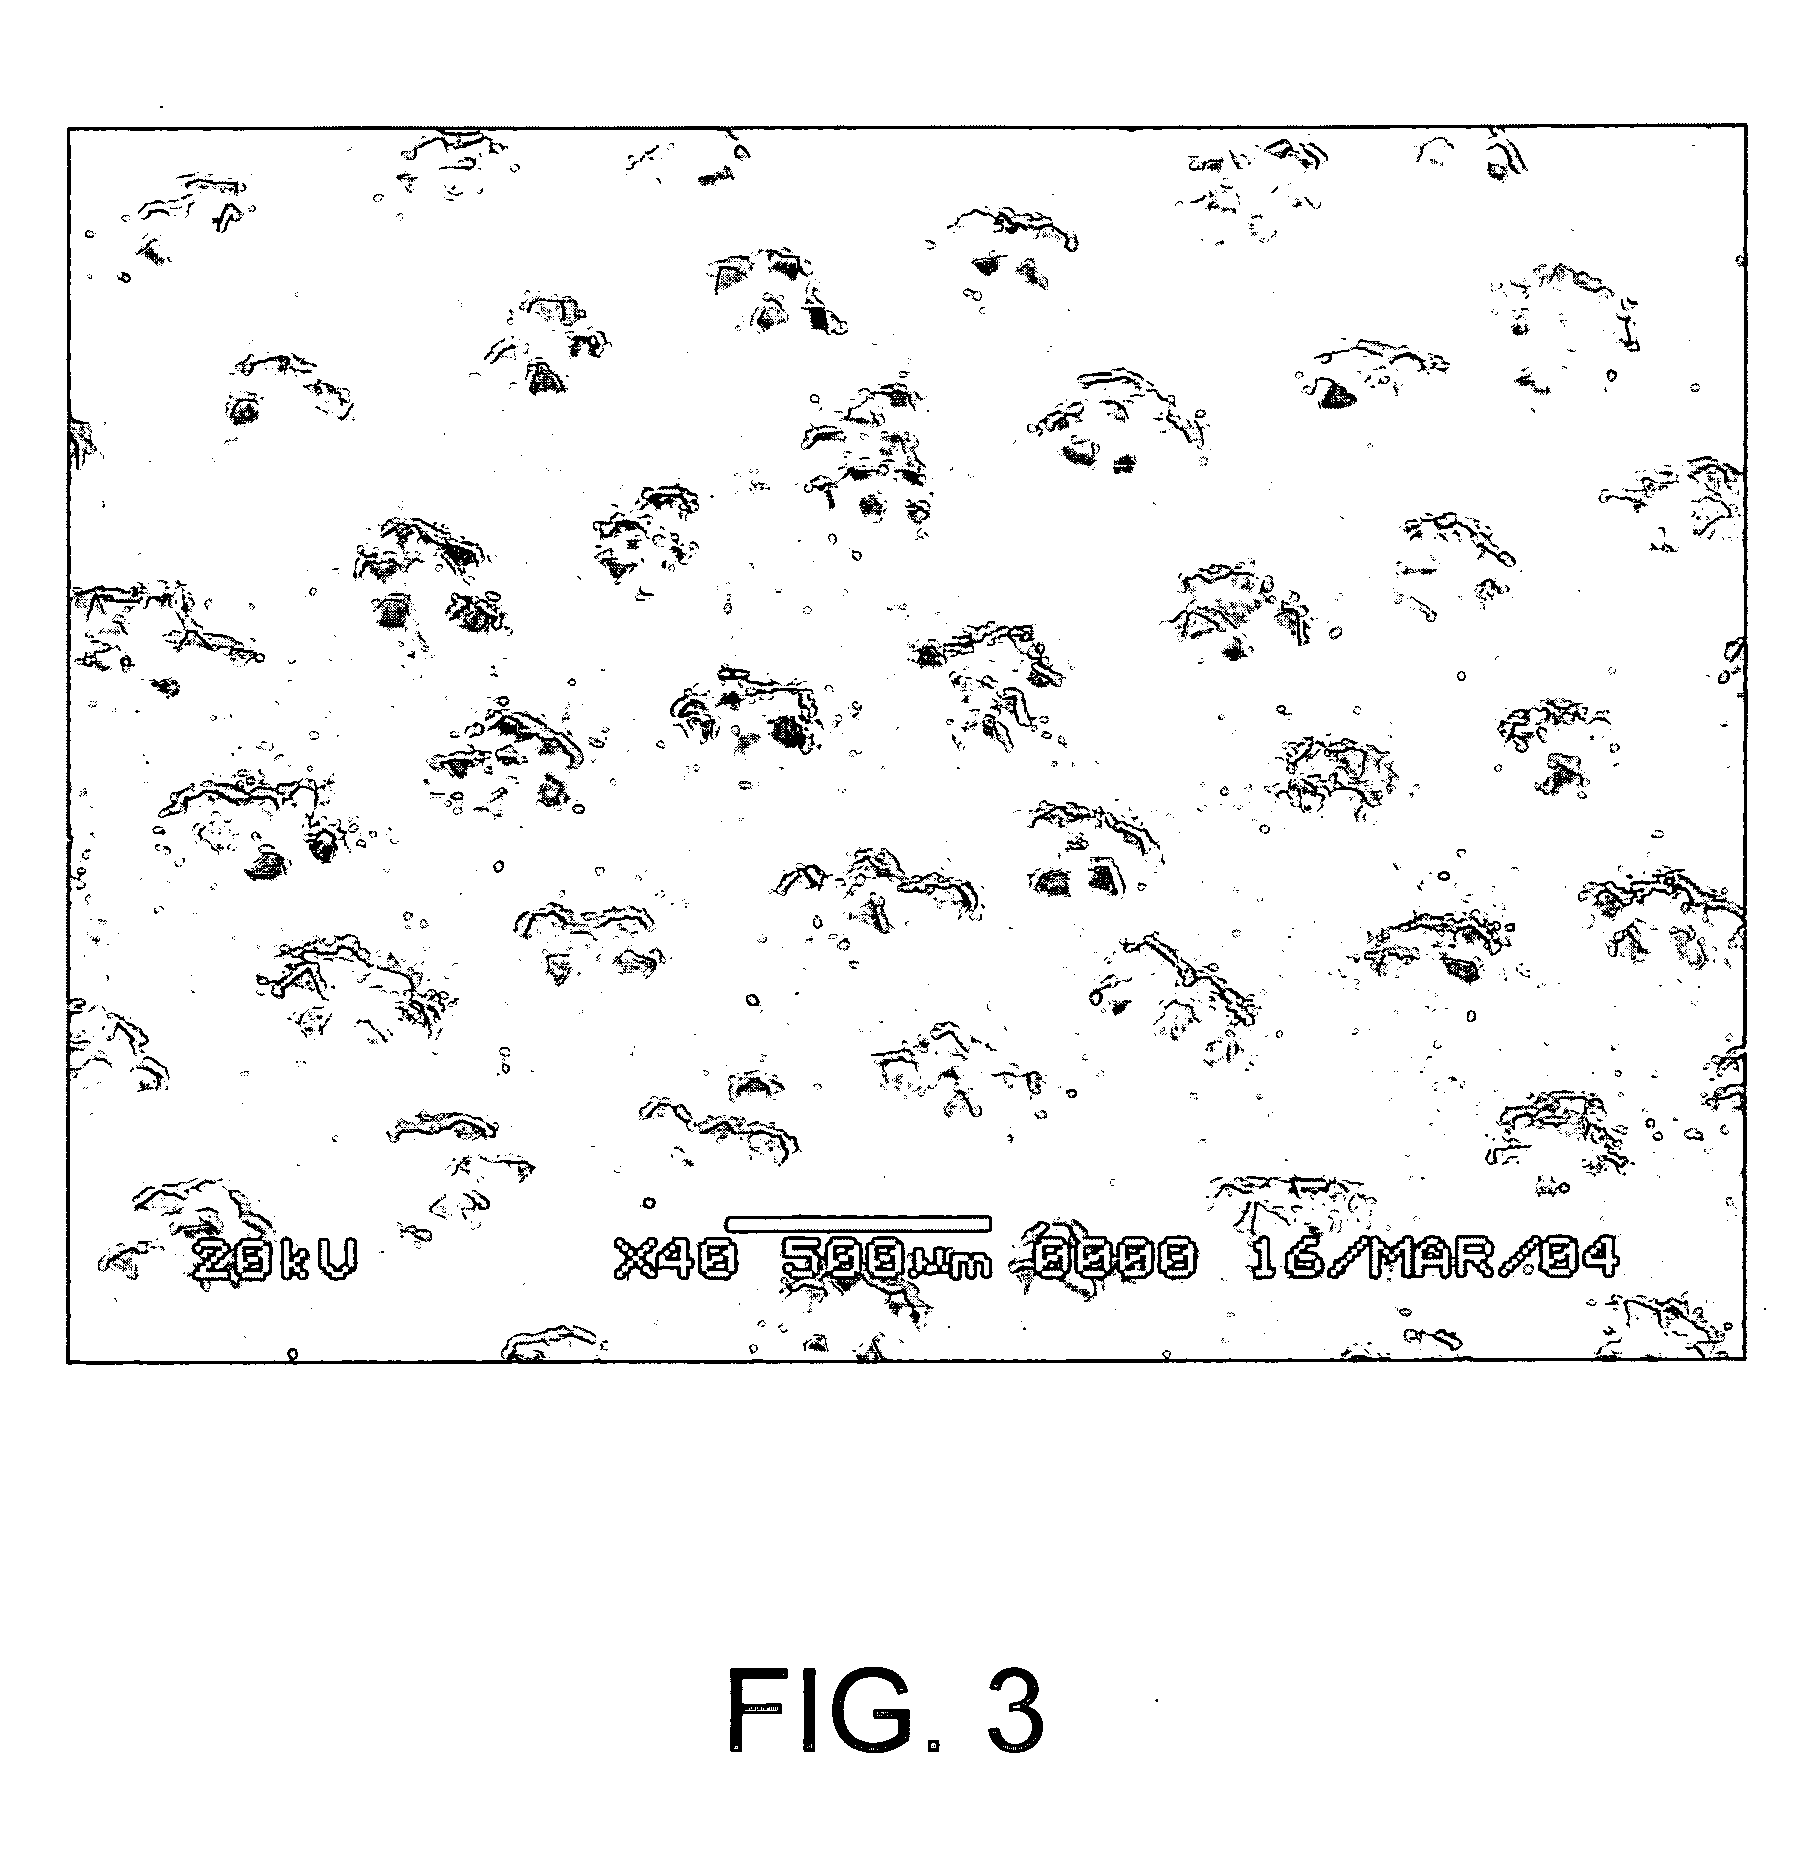 Abrasive tool and method of making the same